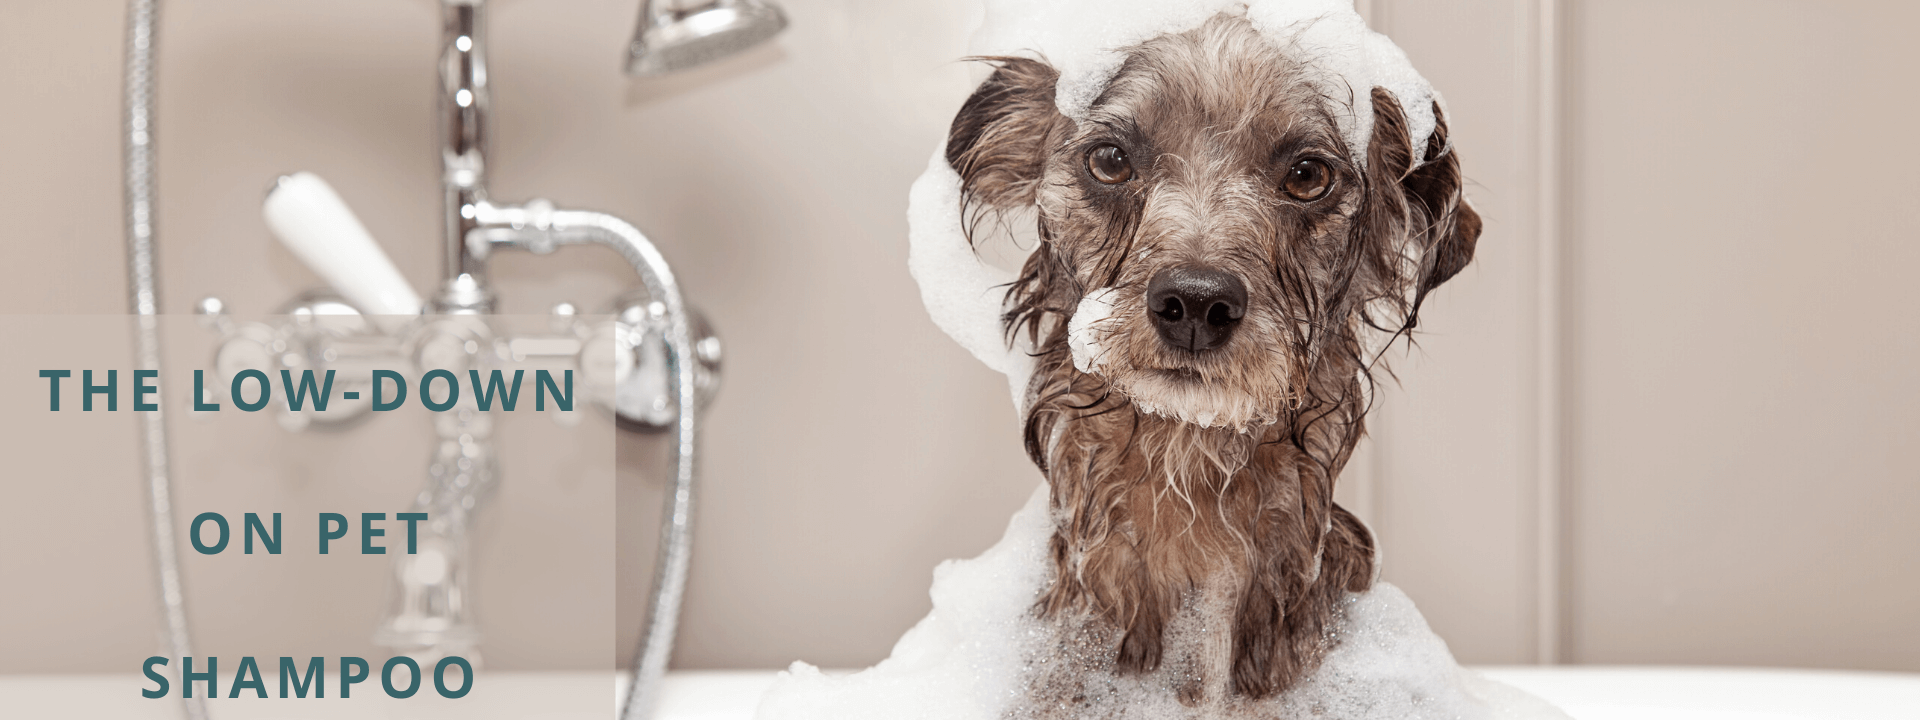 The Down-Low on Pet Shampoo